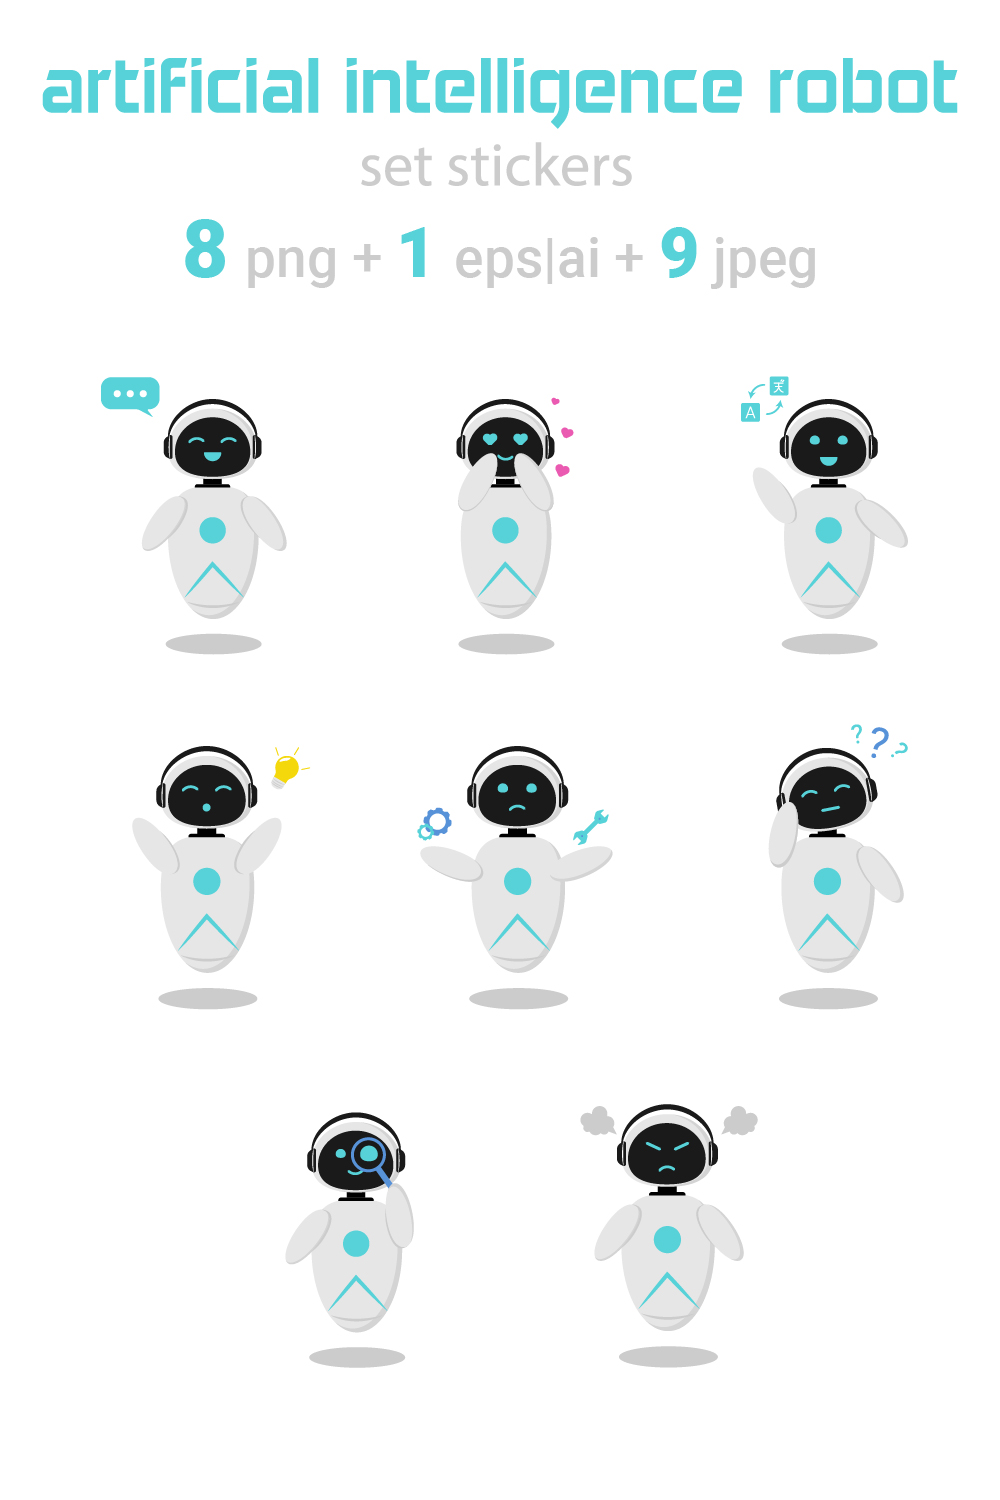 Set of robot stickers with artificial intelligence pinterest preview image.